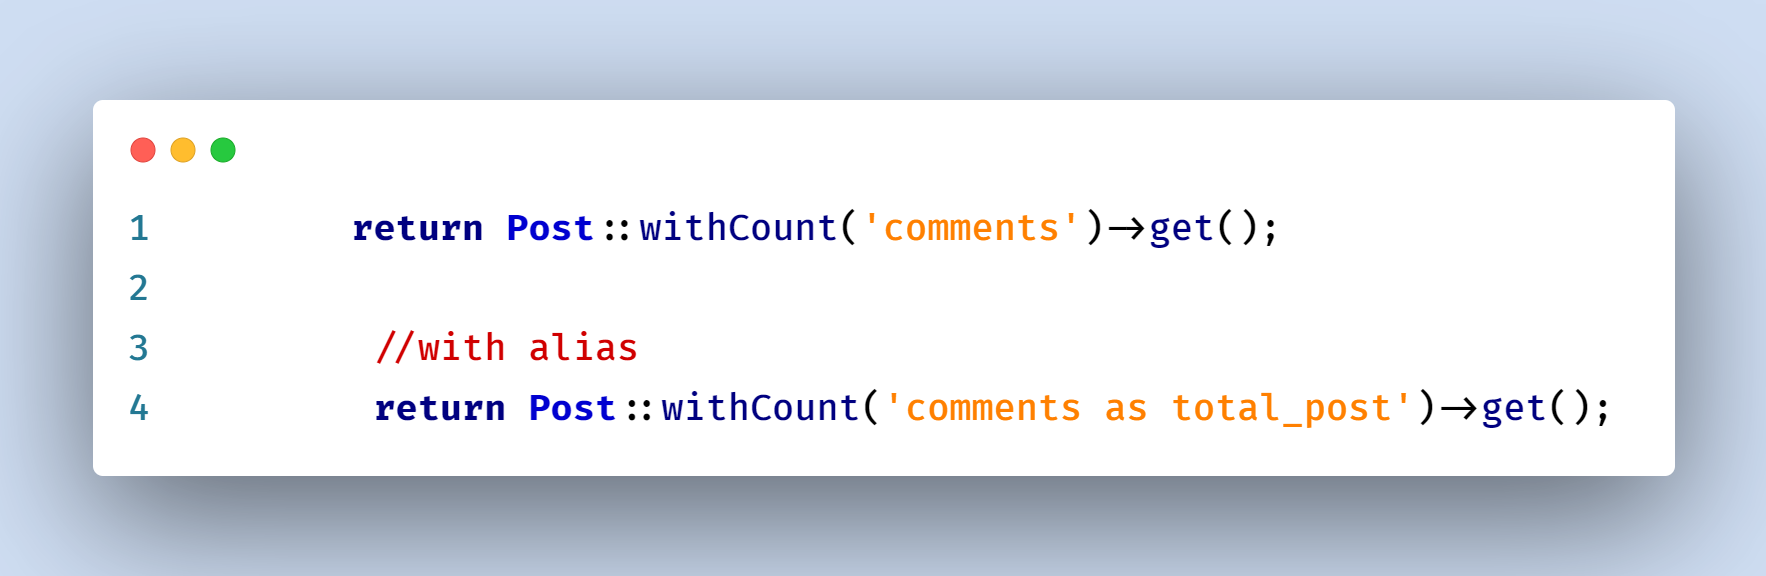 laravel-9-withcount-example